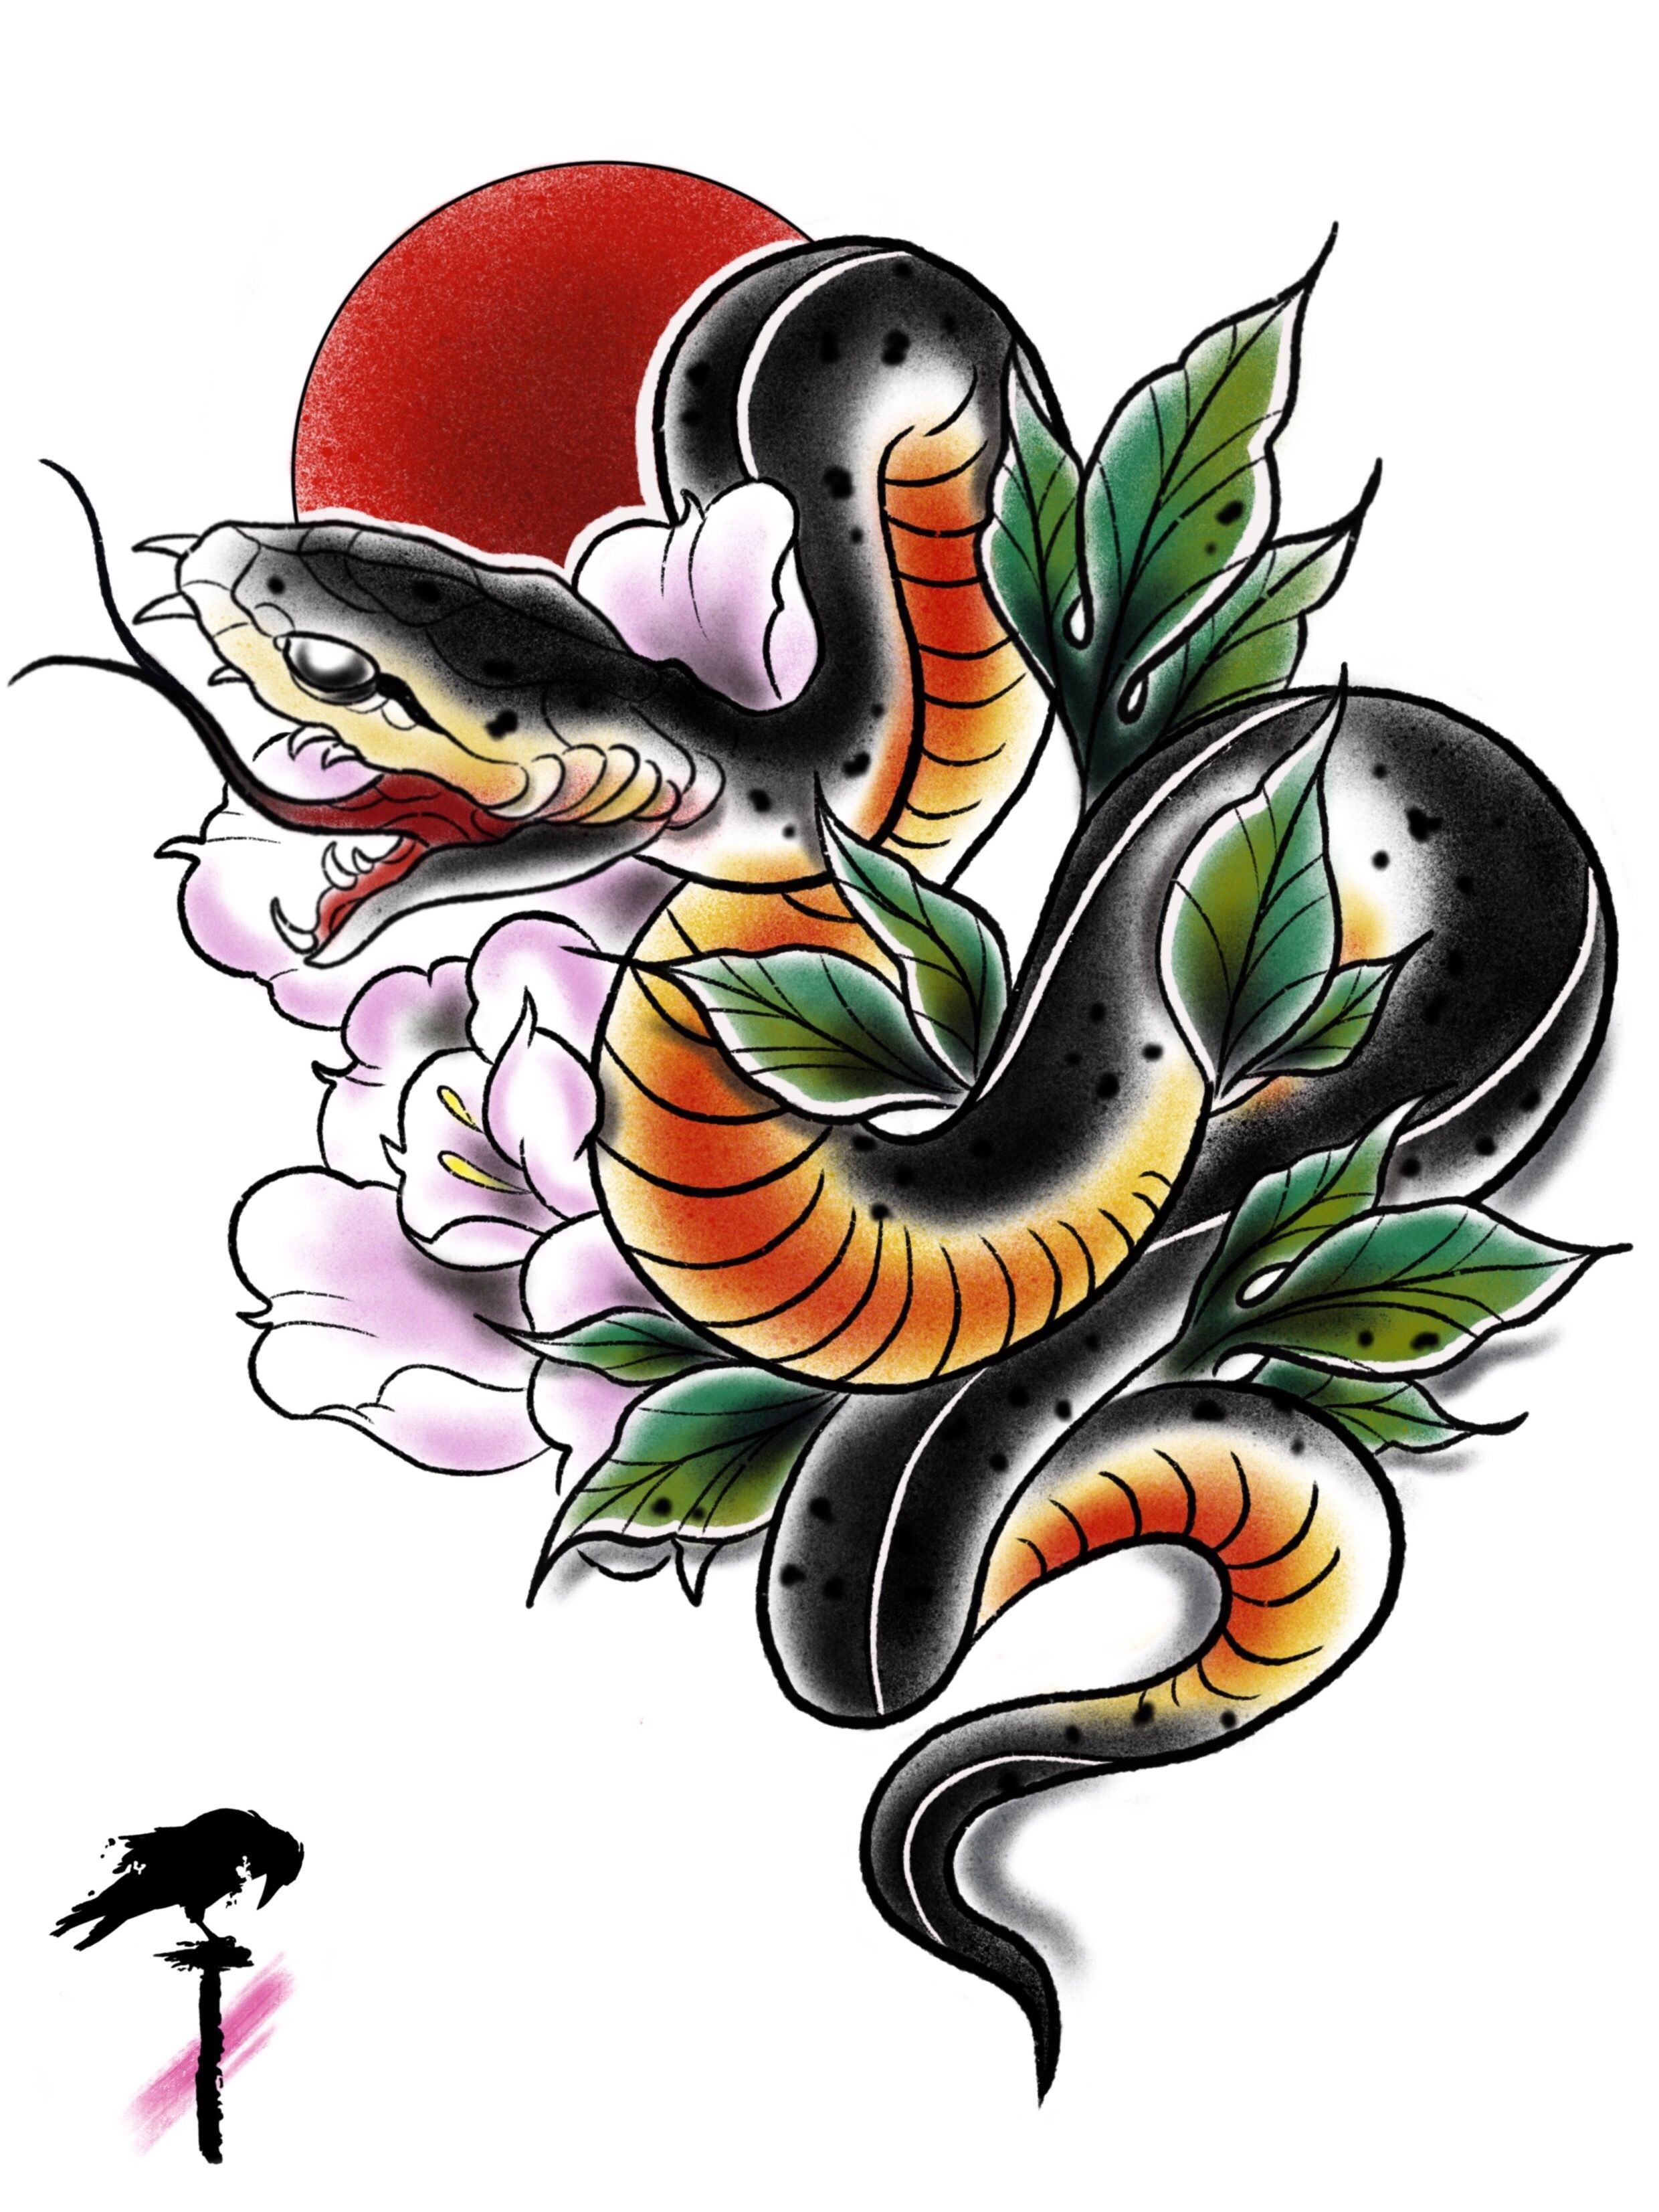 Neotraditional snake tattoo on the forearm